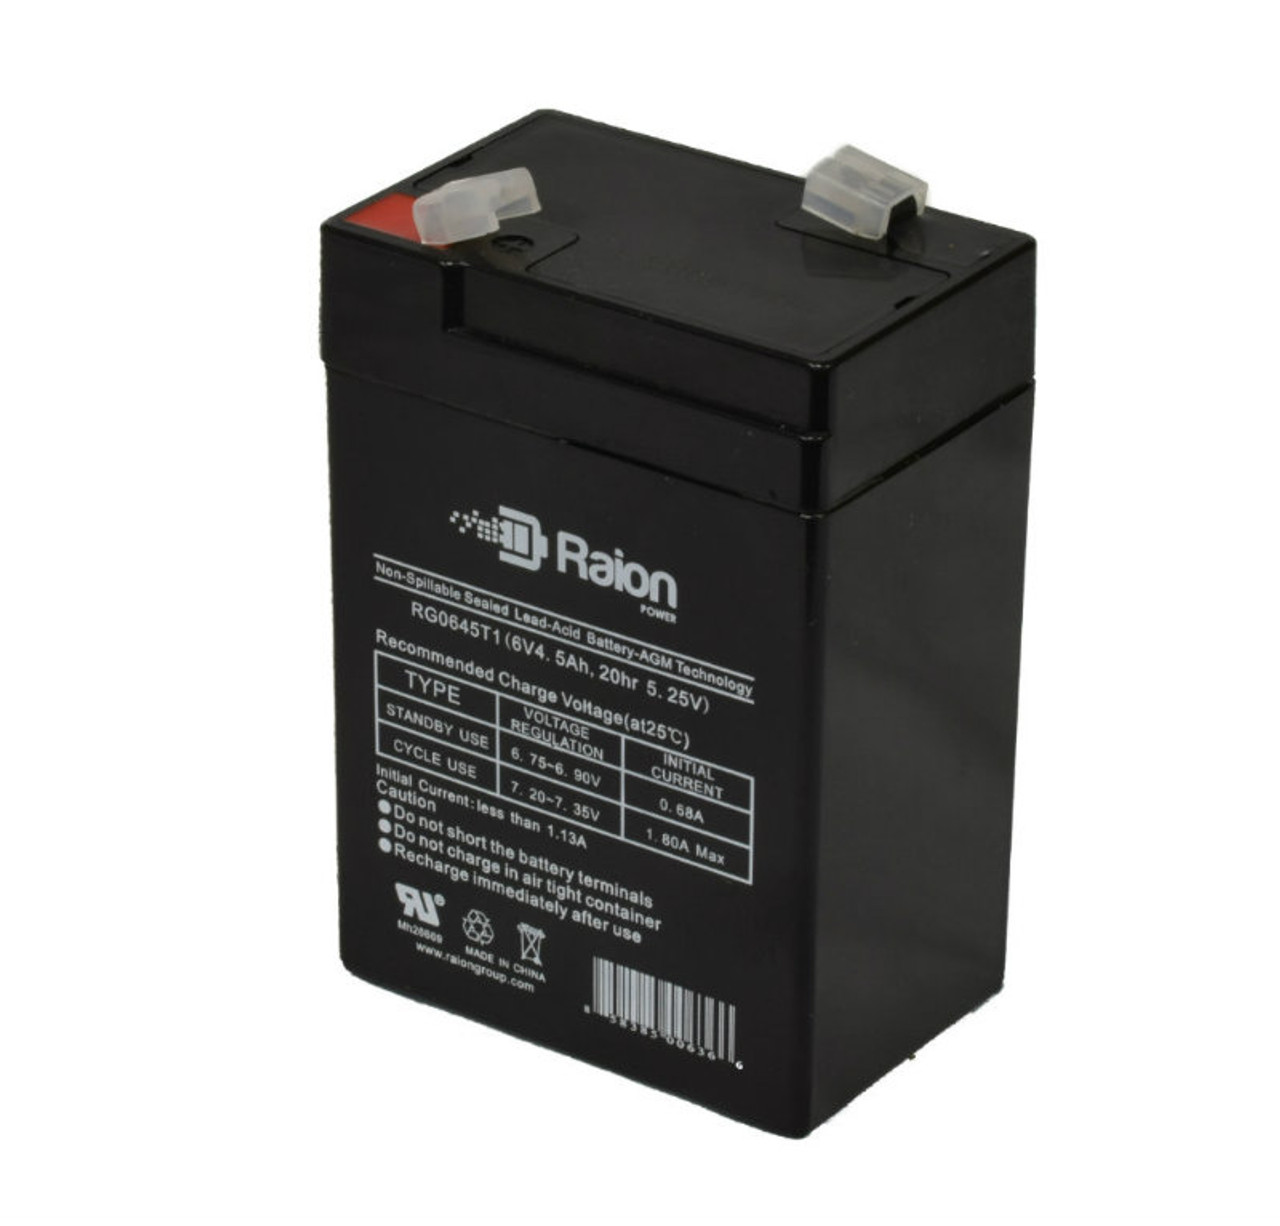 Raion Power RG0645T1 6V 4.5Ah Replacement Battery Cartridge for Unibo GB6-6